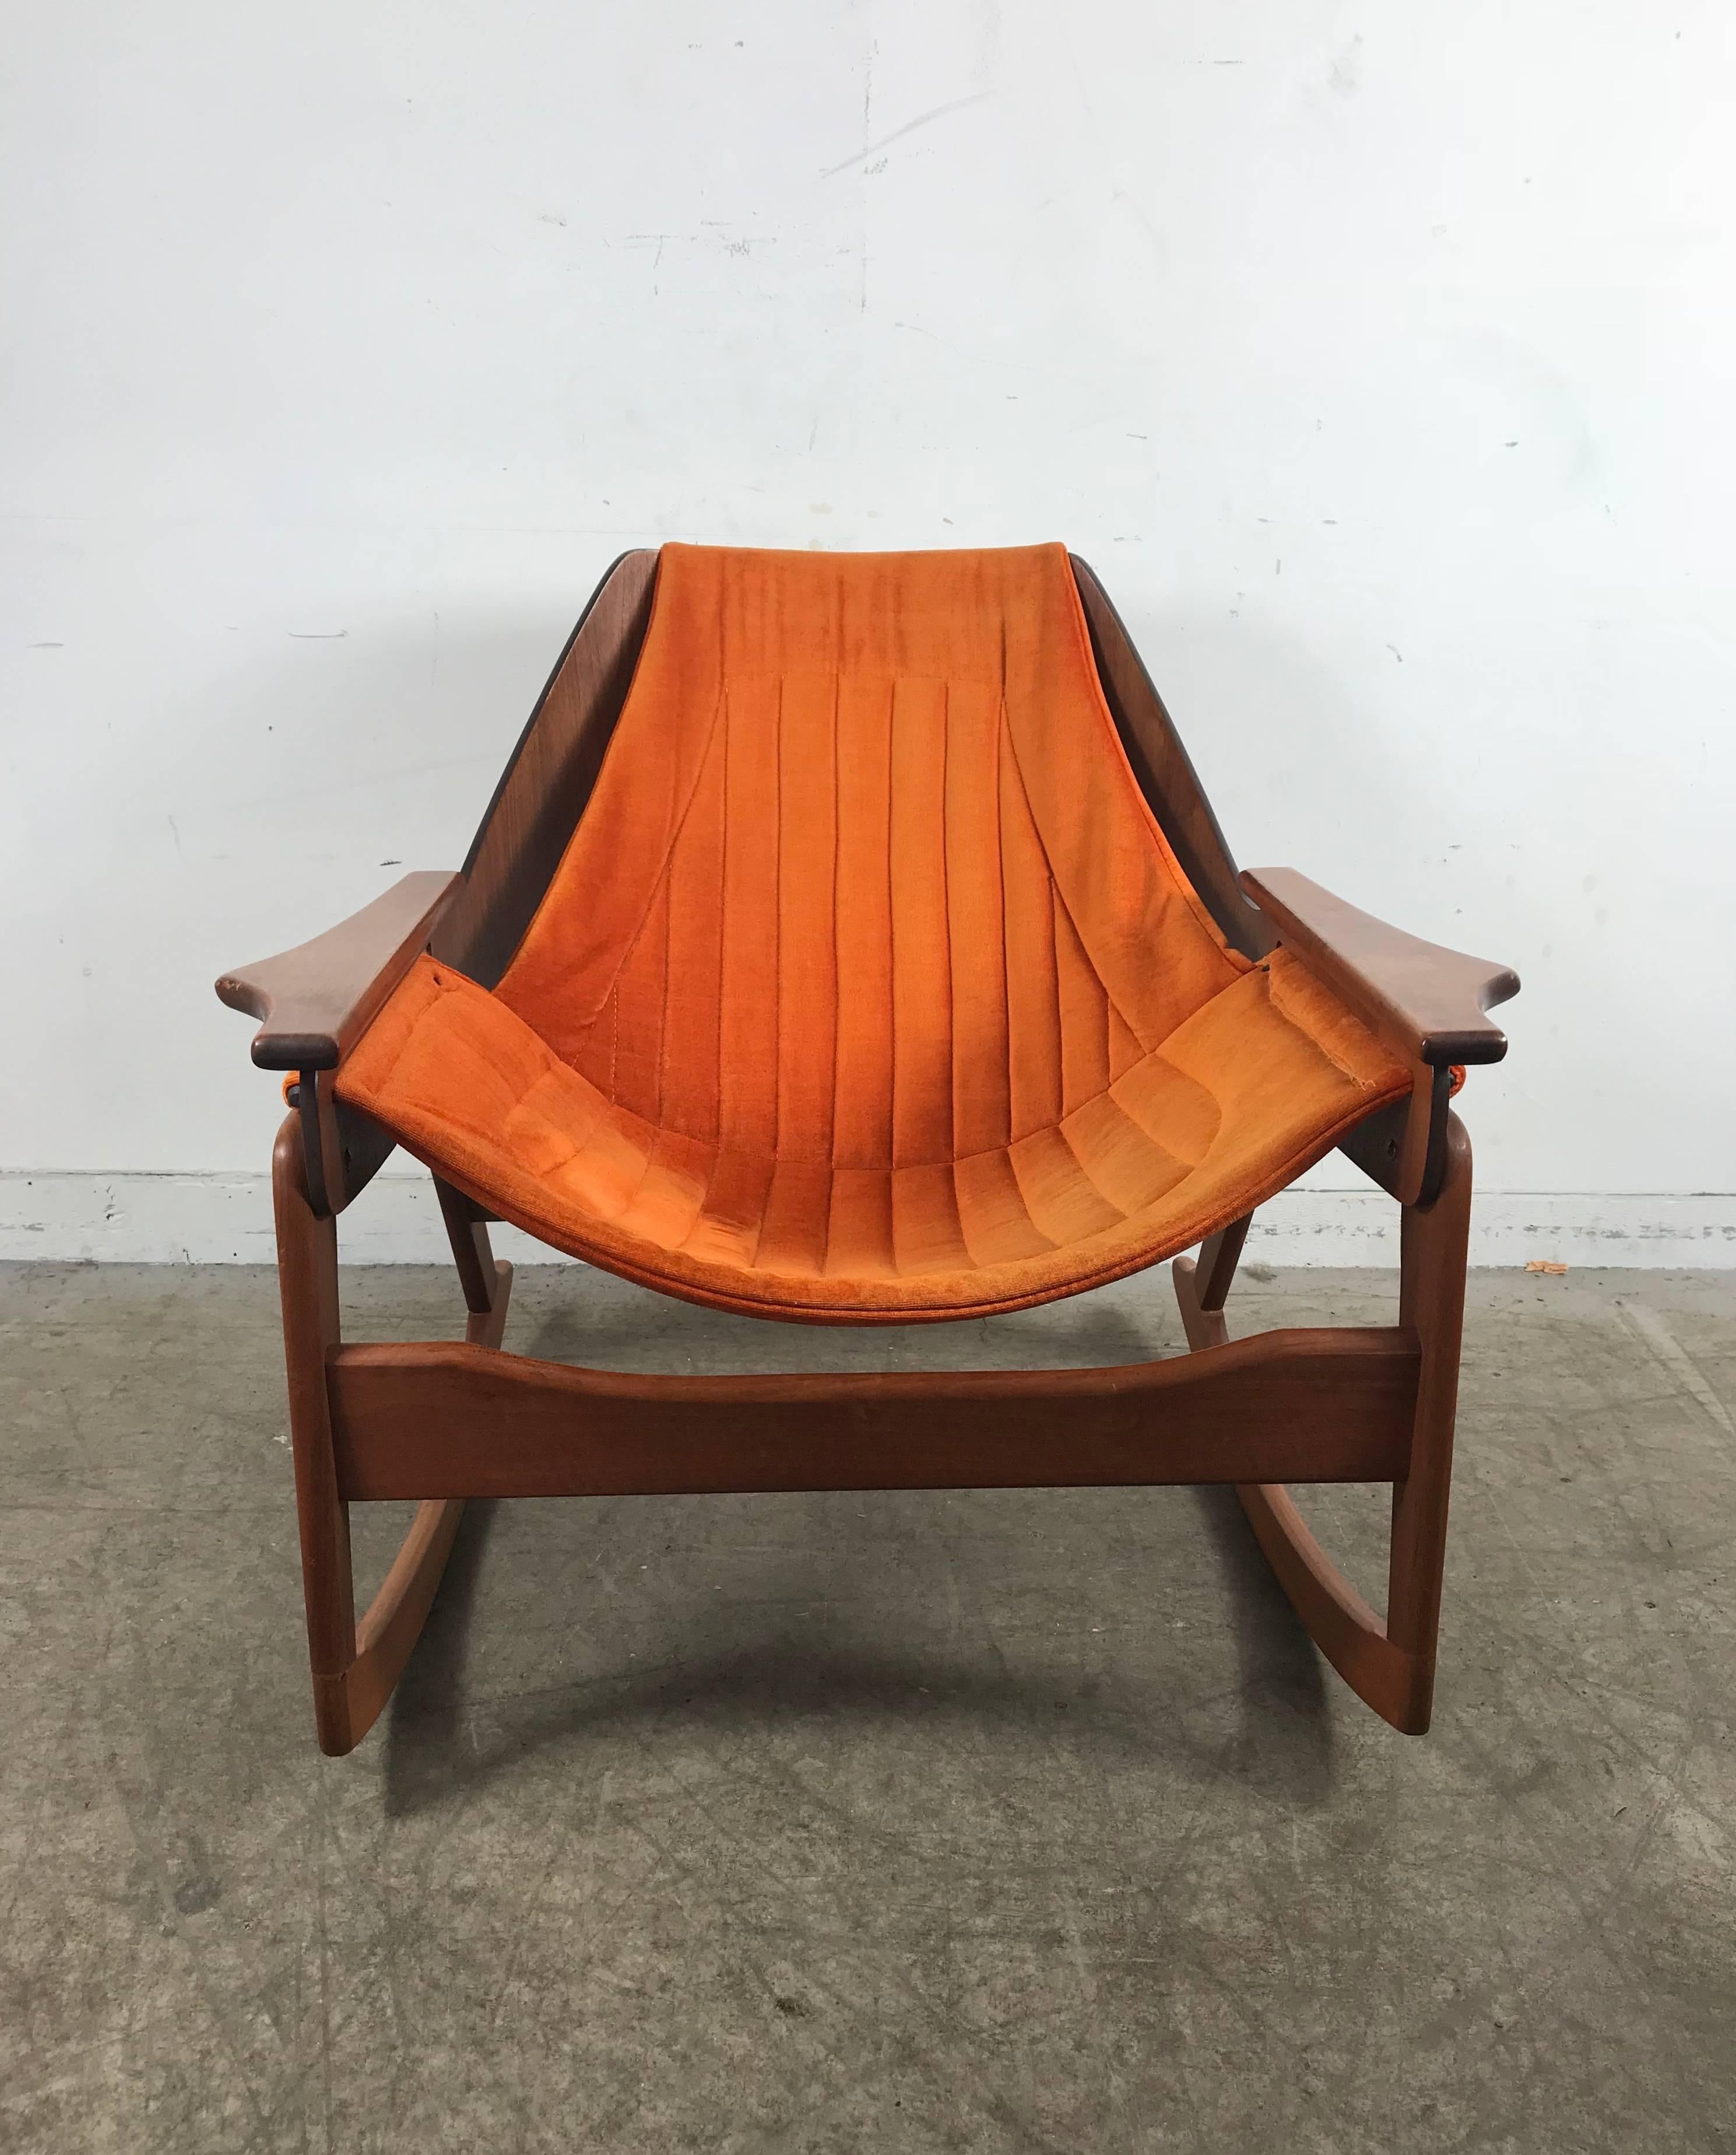 A stunning example of the 1960s original Jerry Johnson design, this rocker is a perfect mix of Classic midcentury design features. Extremely comfortable, chair features a bent walnut plywood frame supporting its original deep sling cantilevered over